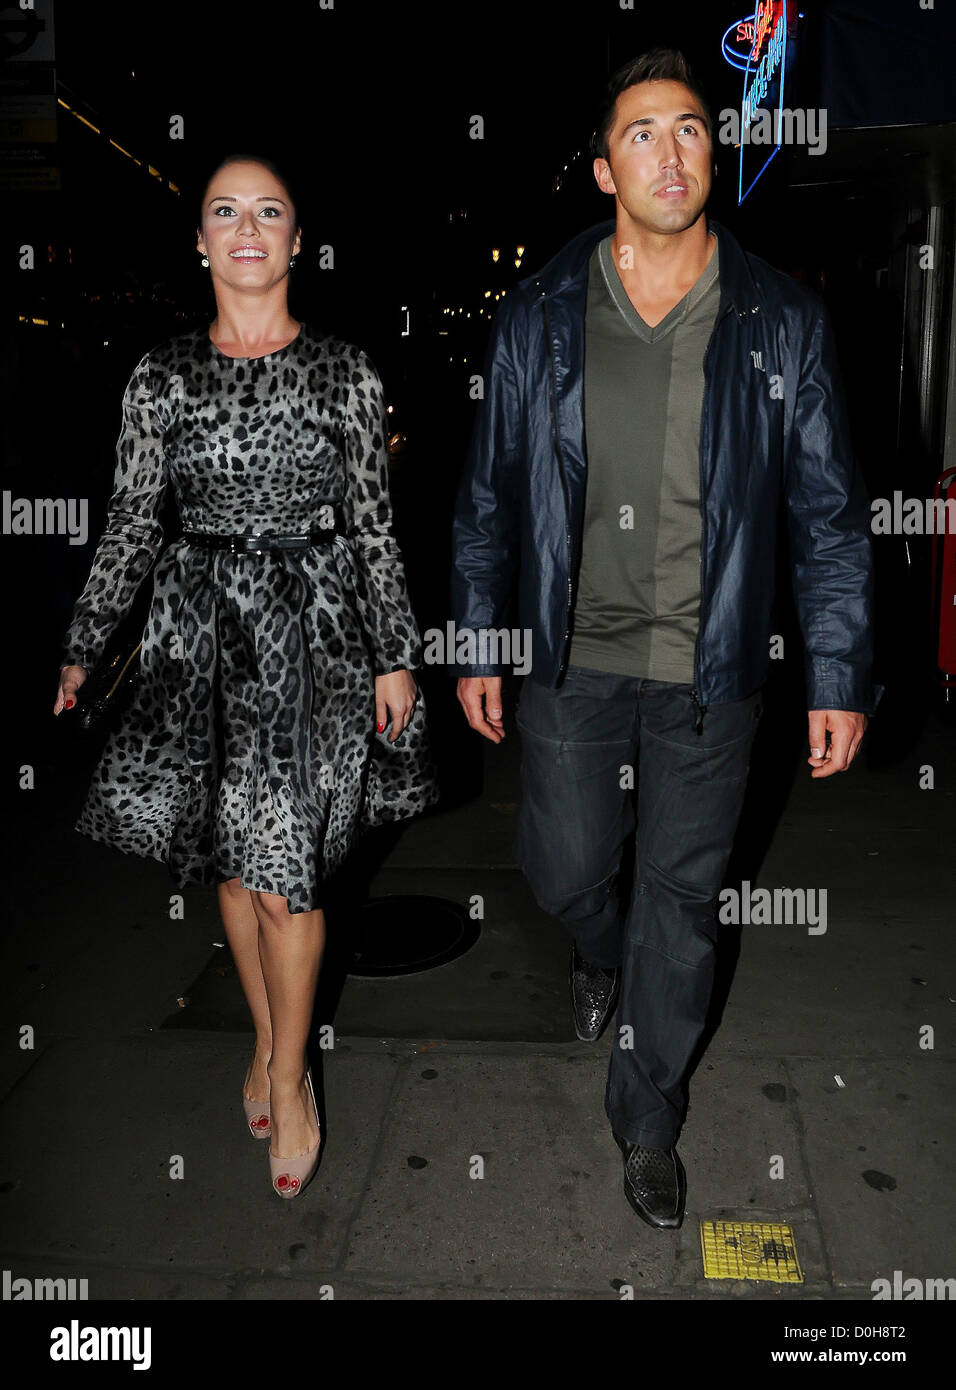 Gavin Henson and his Strictly Come Dancing partner Katya Virshilas arrive at Aldwych Theatre to see 'Dirty Dancing' together Stock Photo